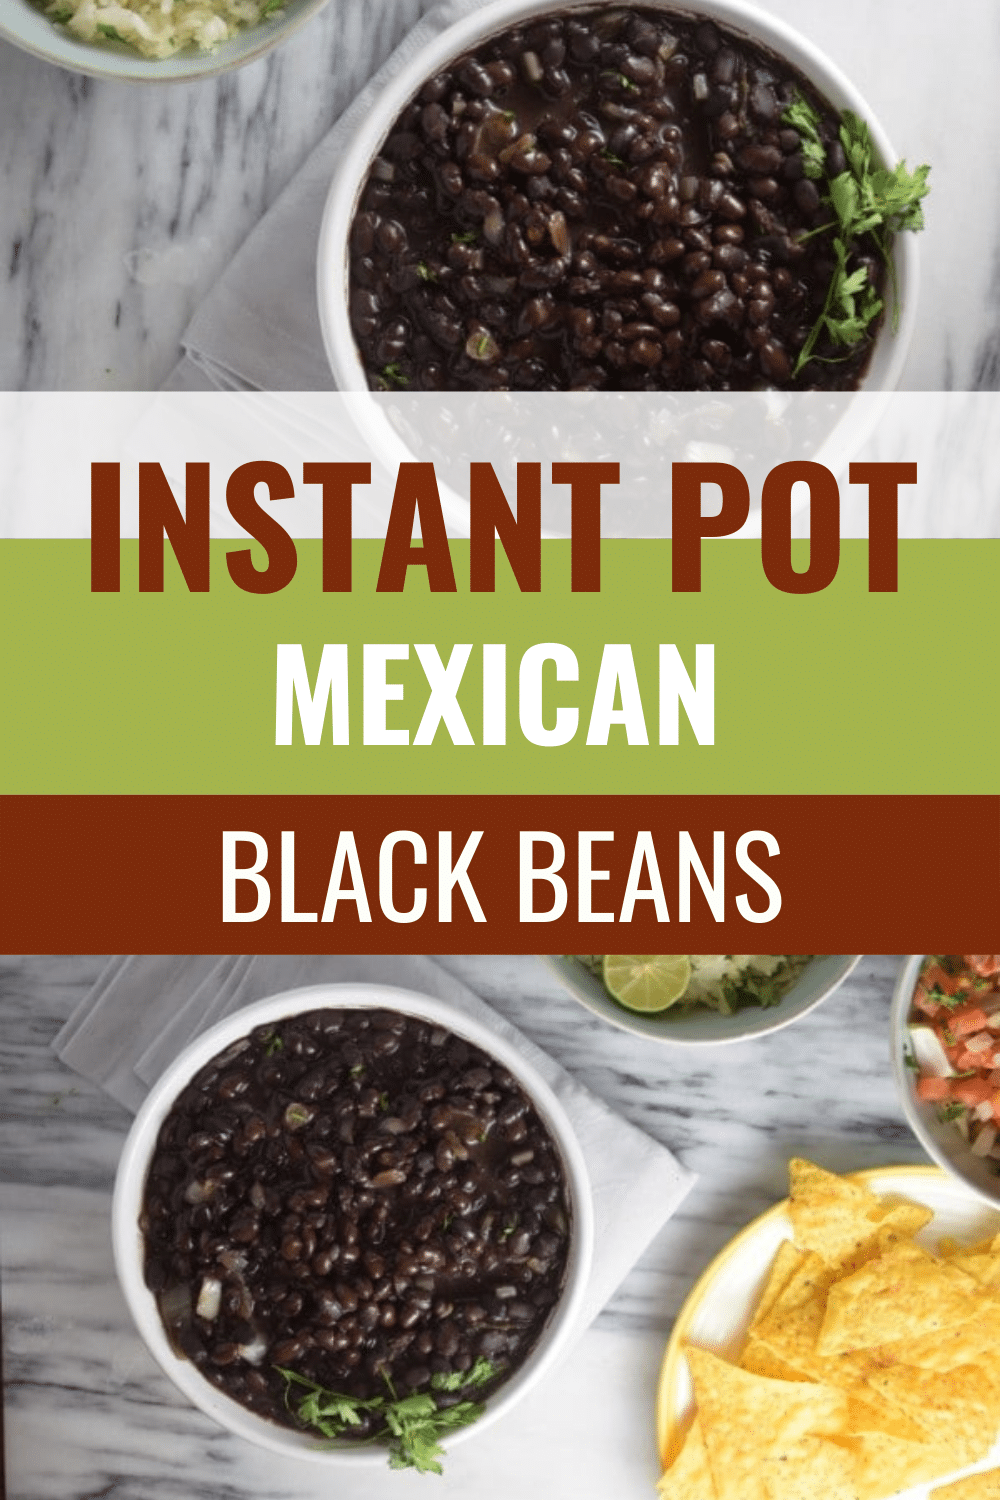 These Instant Pot Mexican Black Beans are the perfect Mexican side dish. Delicious, nutritious, and SO easy to make! #instantpot #pressurecooker #Mexican #blackbeans #sidedish via @wondermomwannab